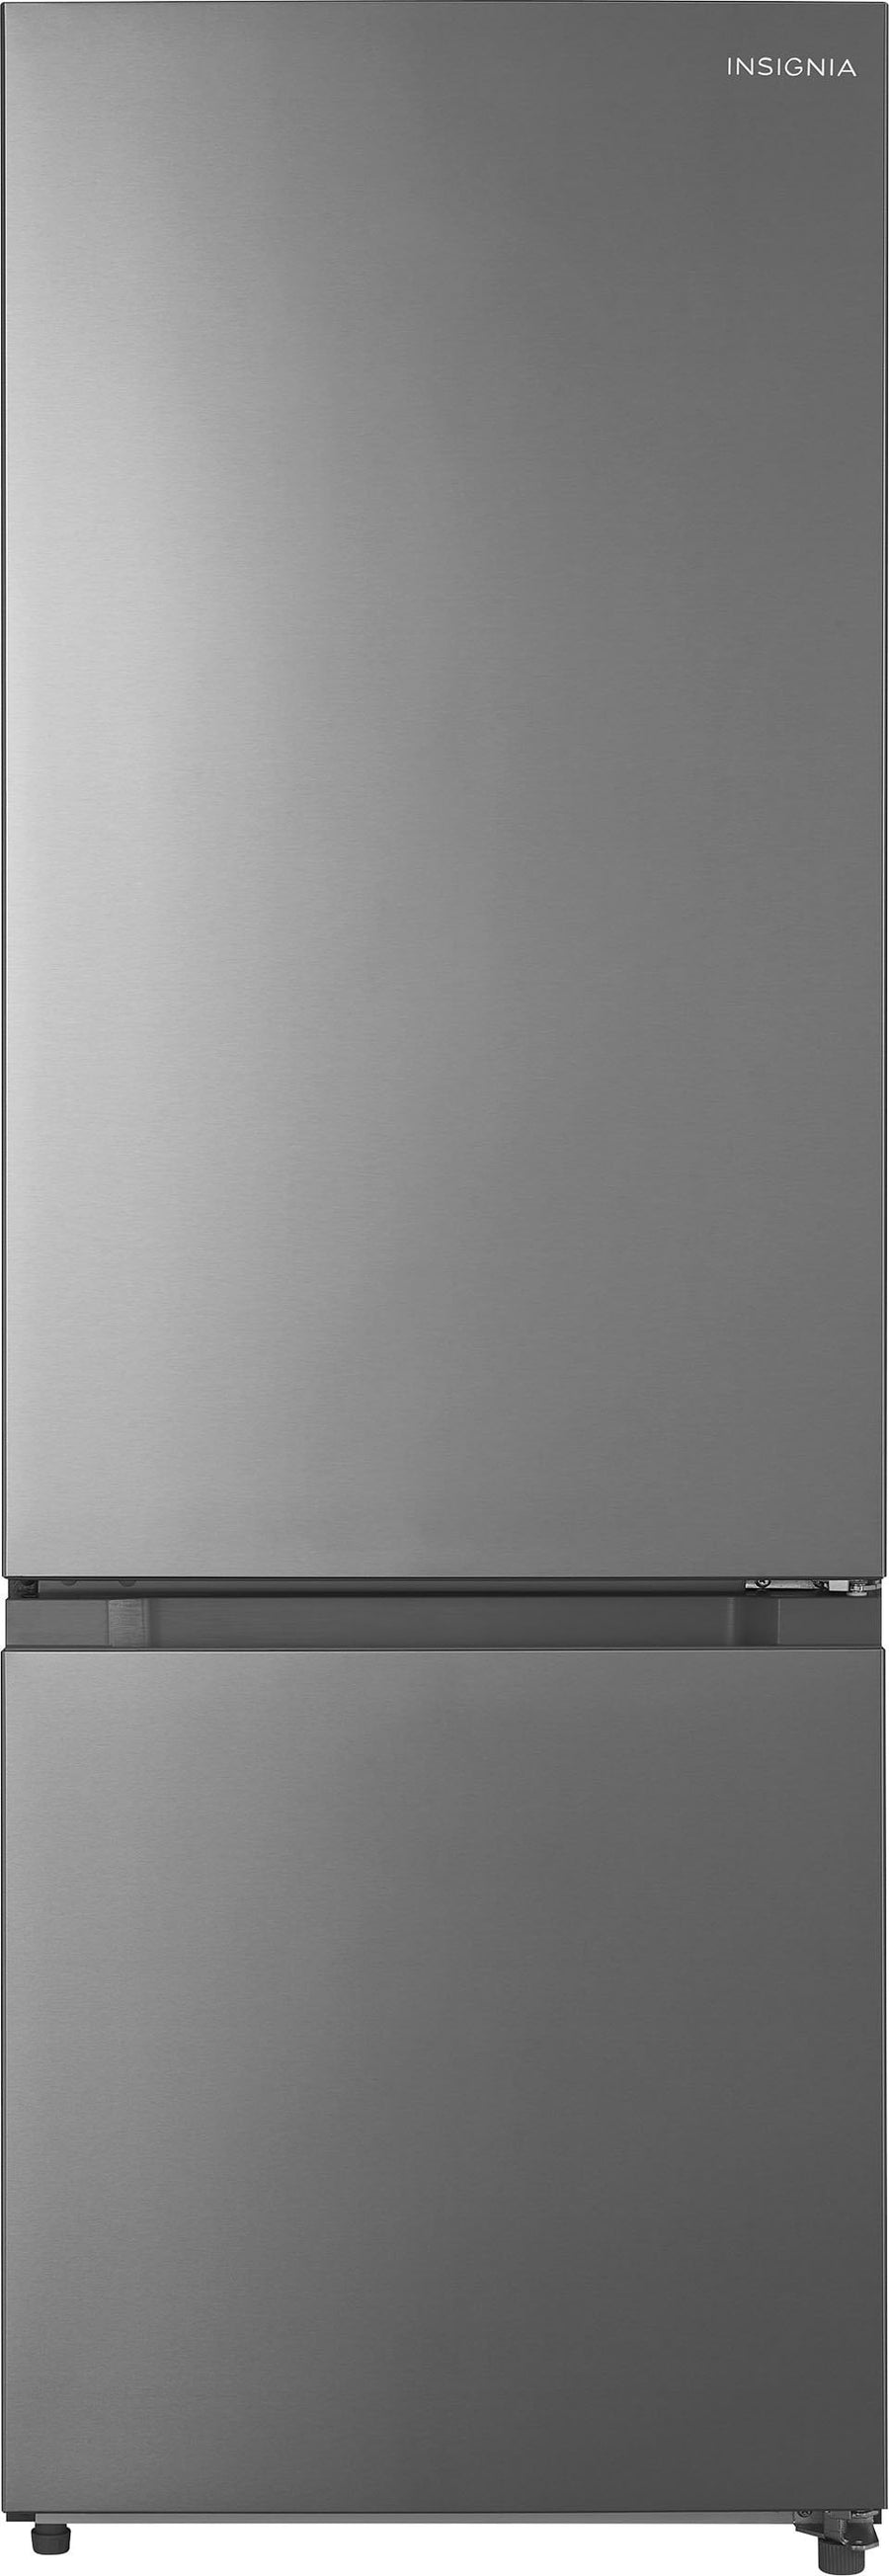 Insignia™ - 11.5 Cu. Ft. Bottom Mount Refrigerator - Stainless steel_0